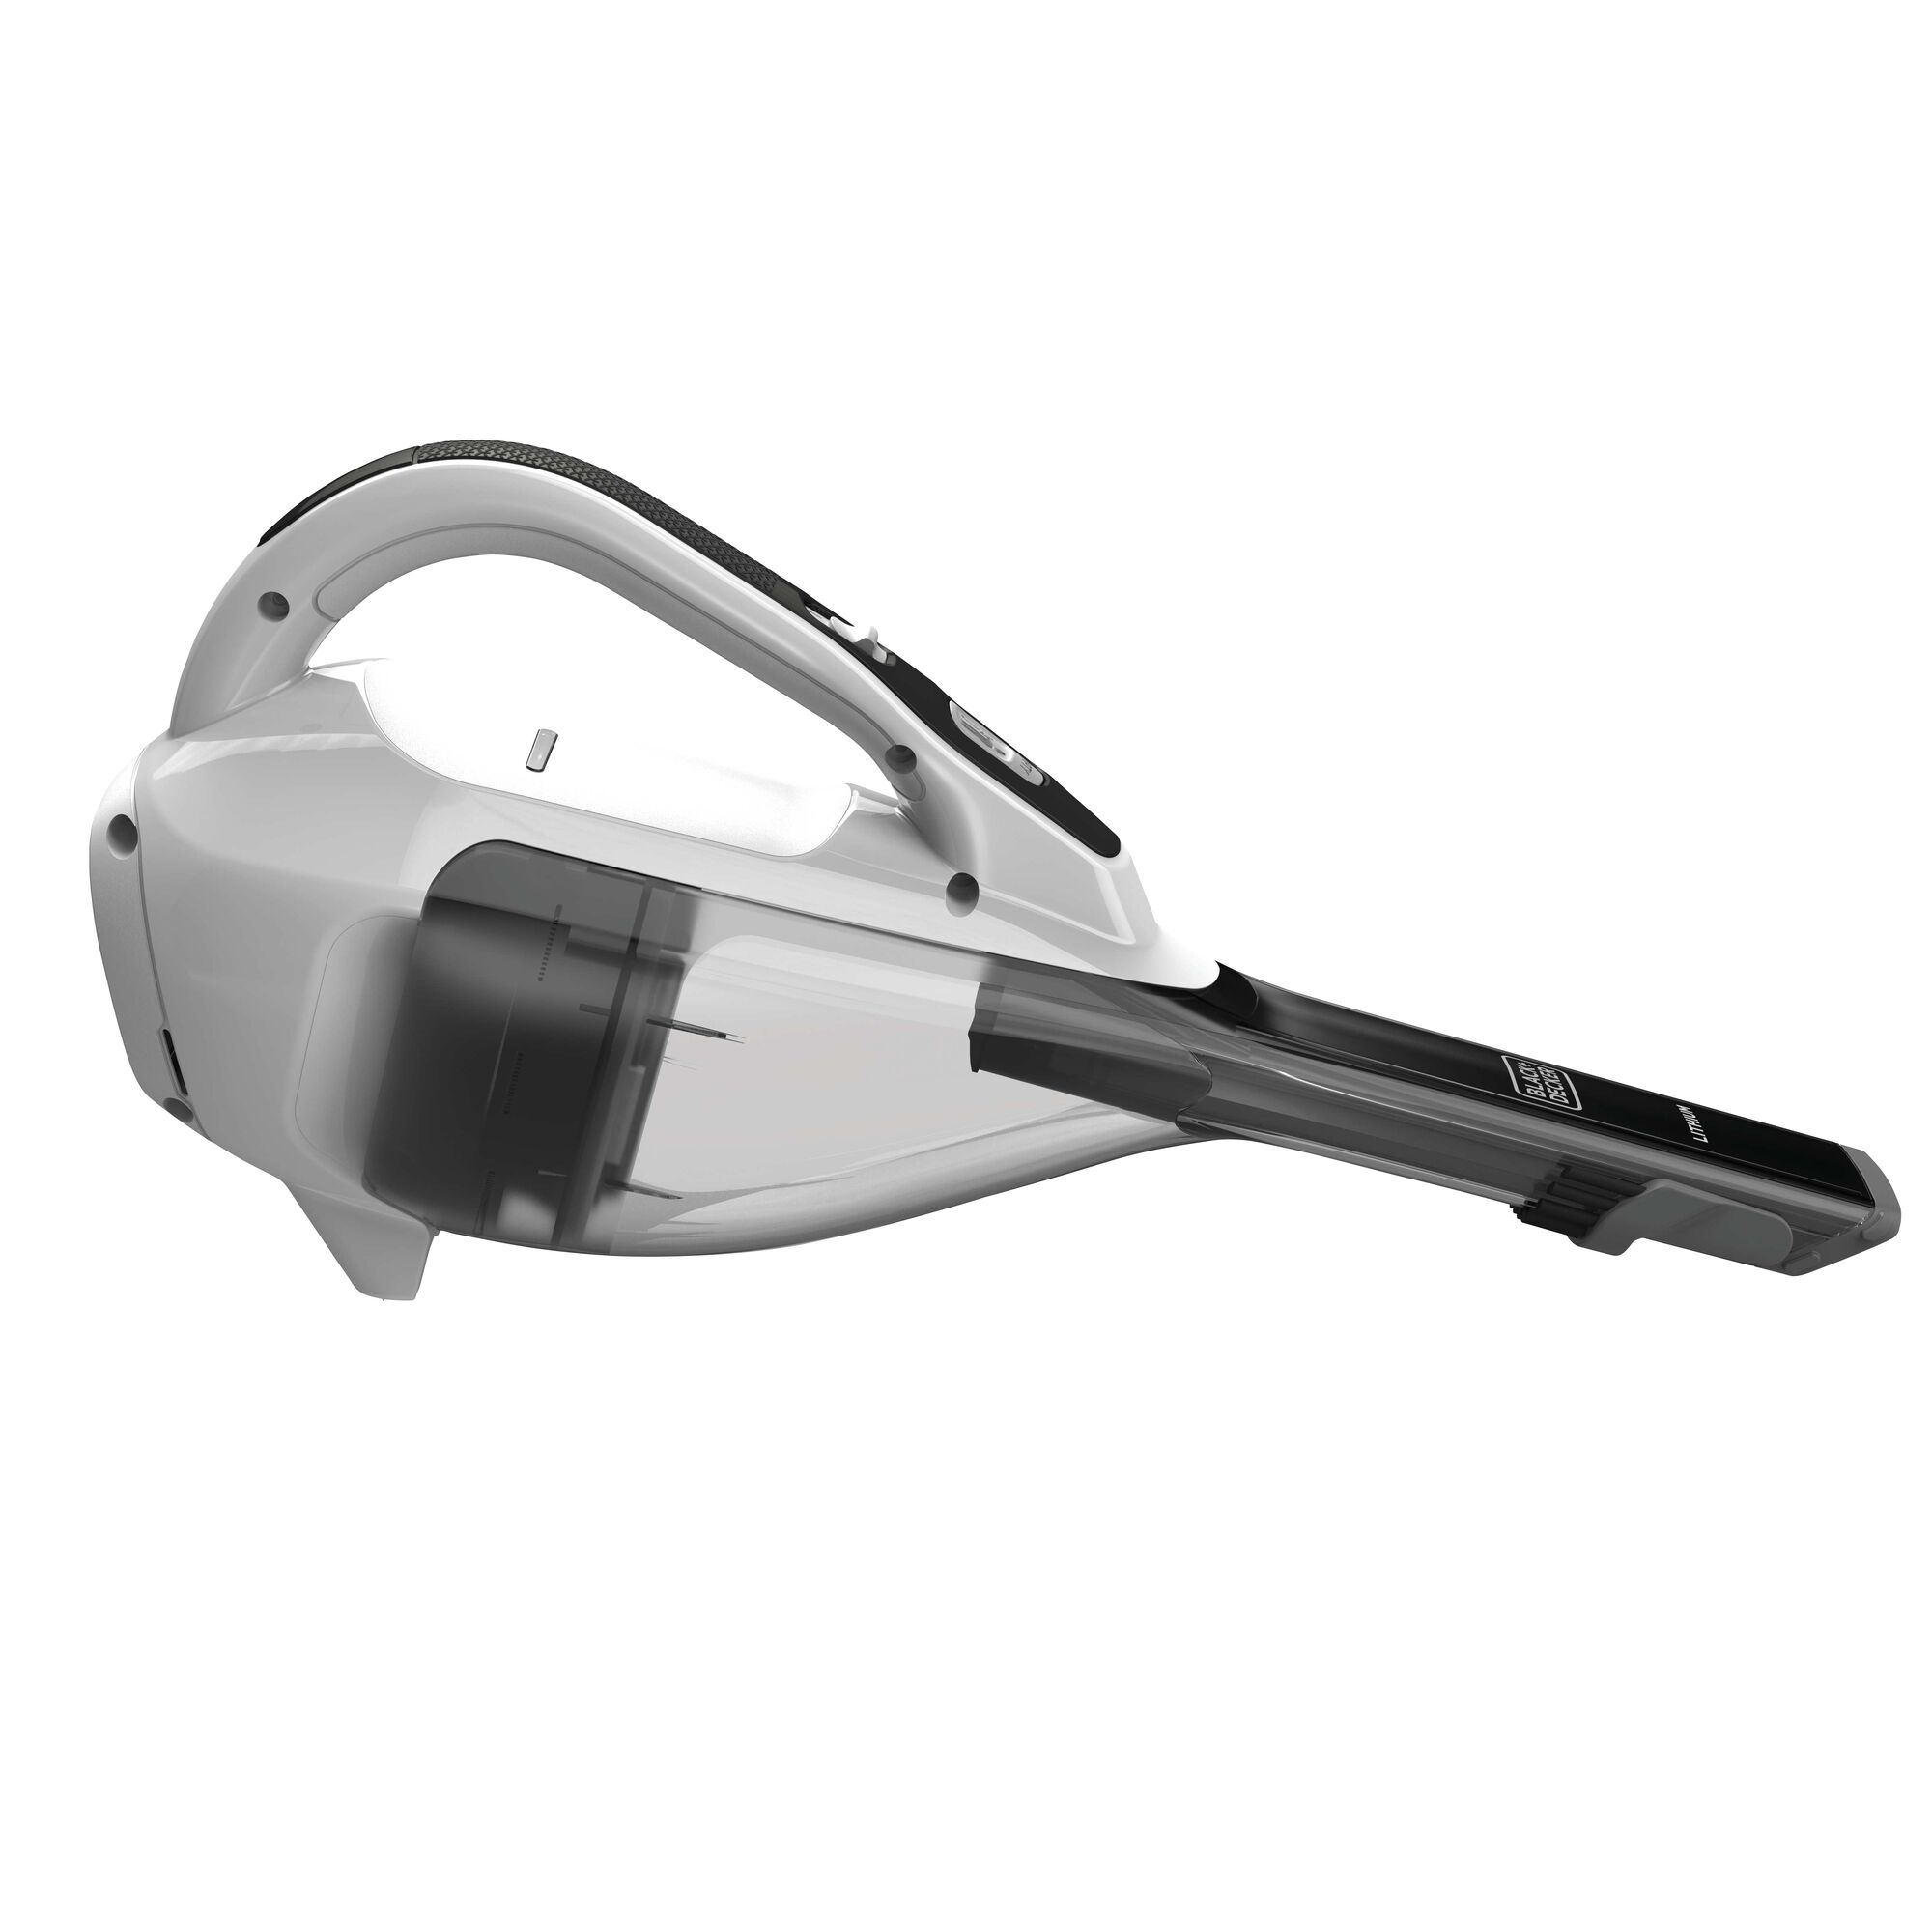 Profile of dustbuster Advanced Clean Cordless Hand Vacuum.